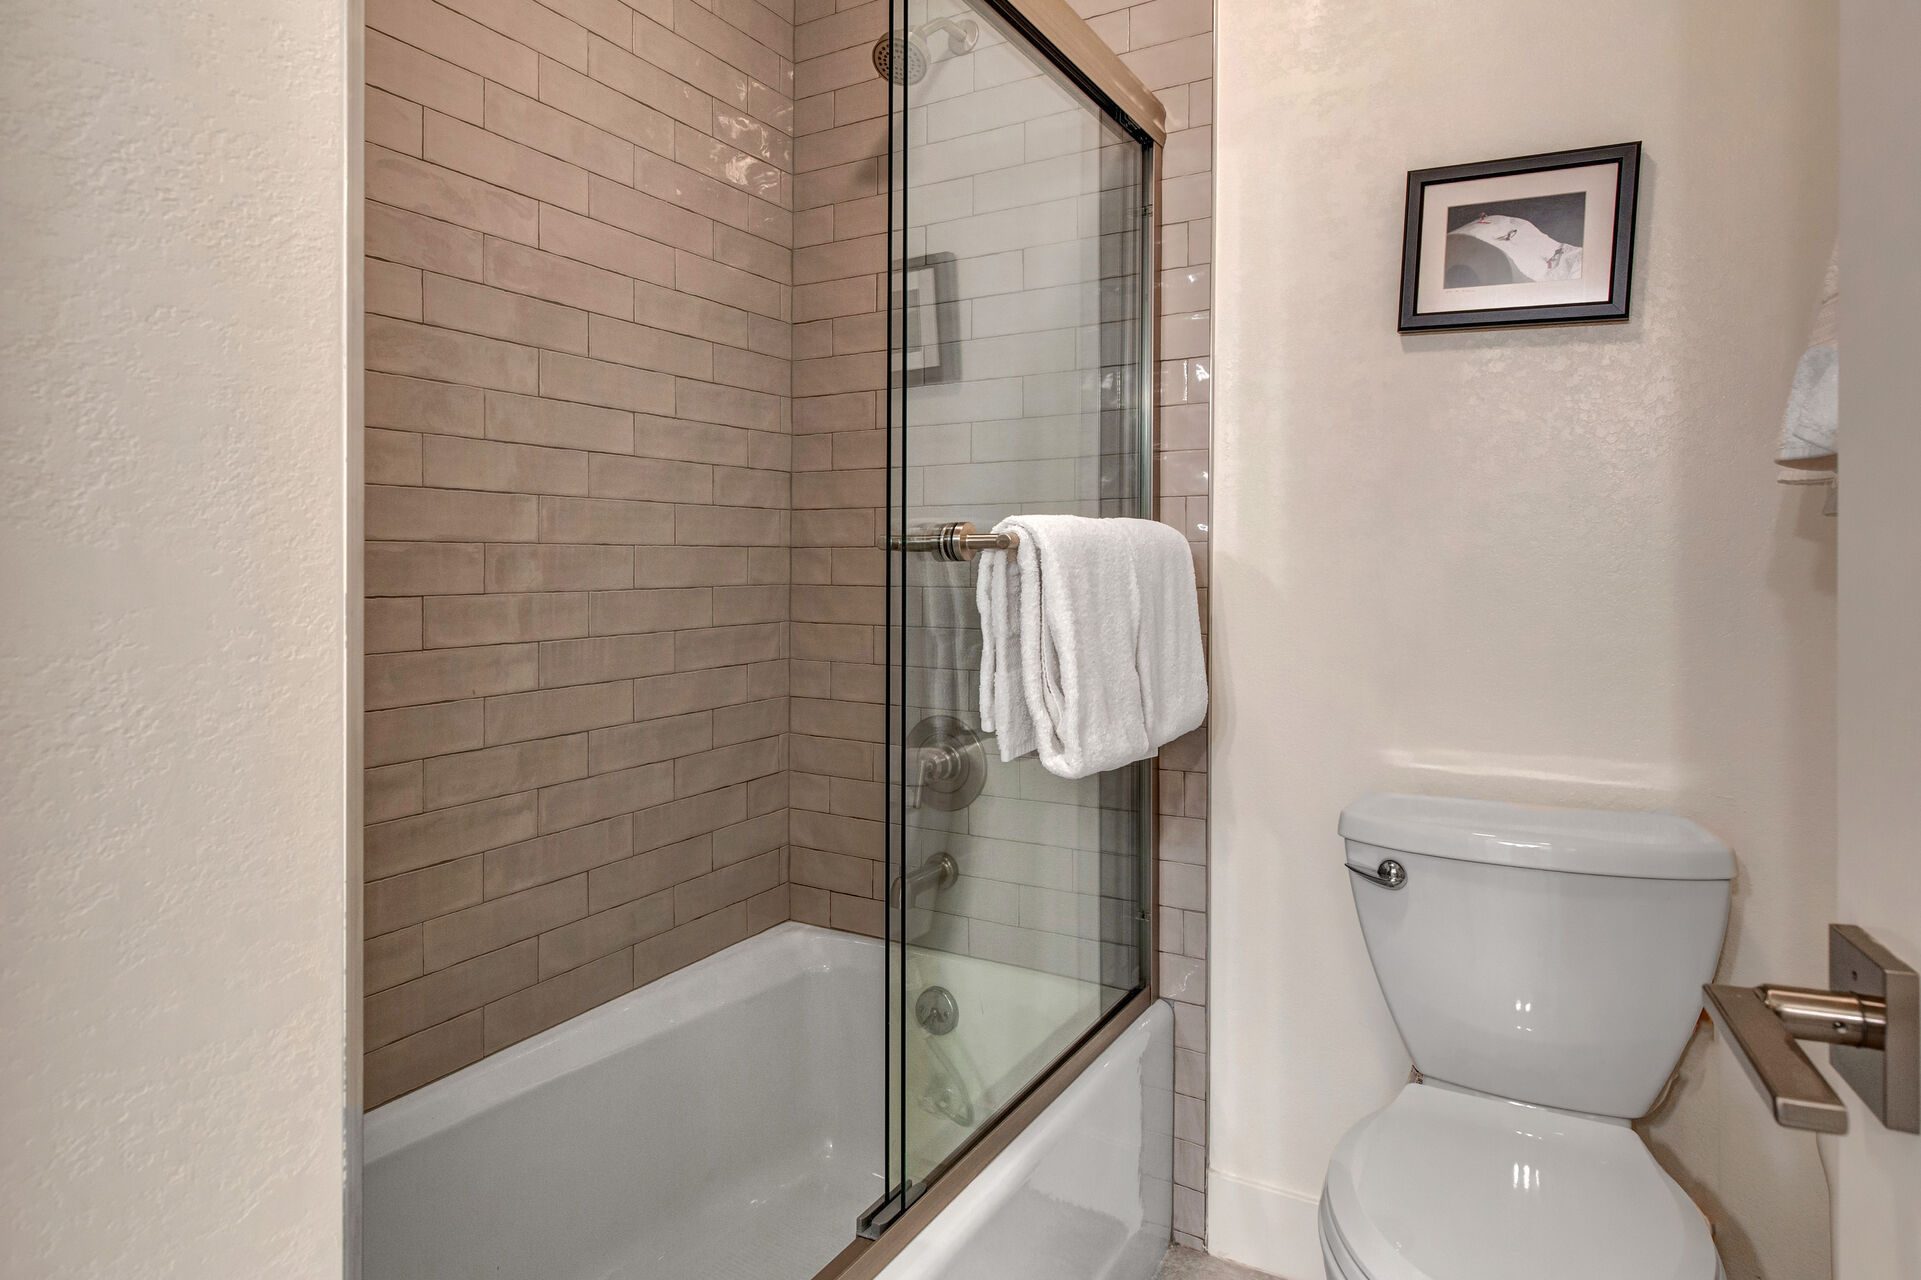 Shared full bath with tub/shower combo and private sauna